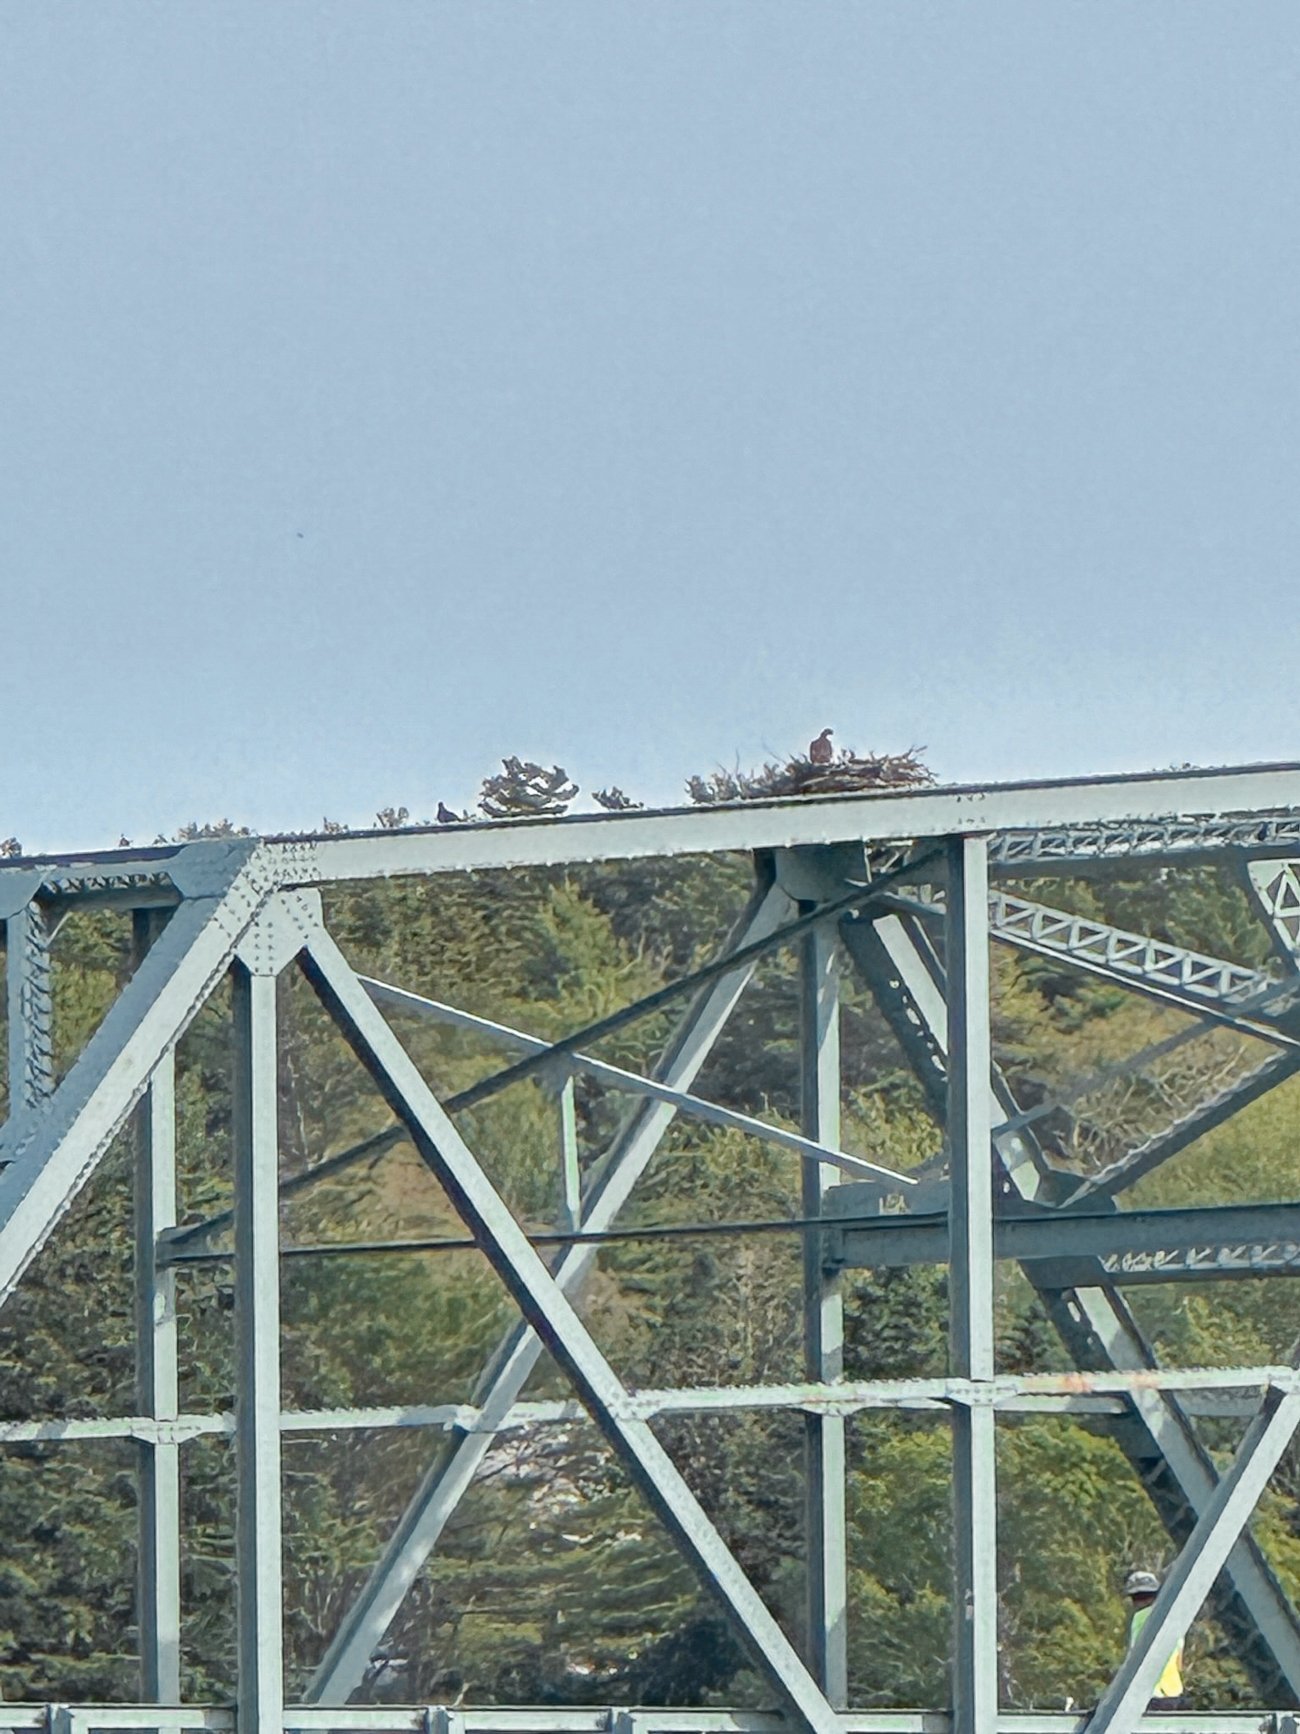 Osprey in its nest on top of Southport Swing Bridge in Maine